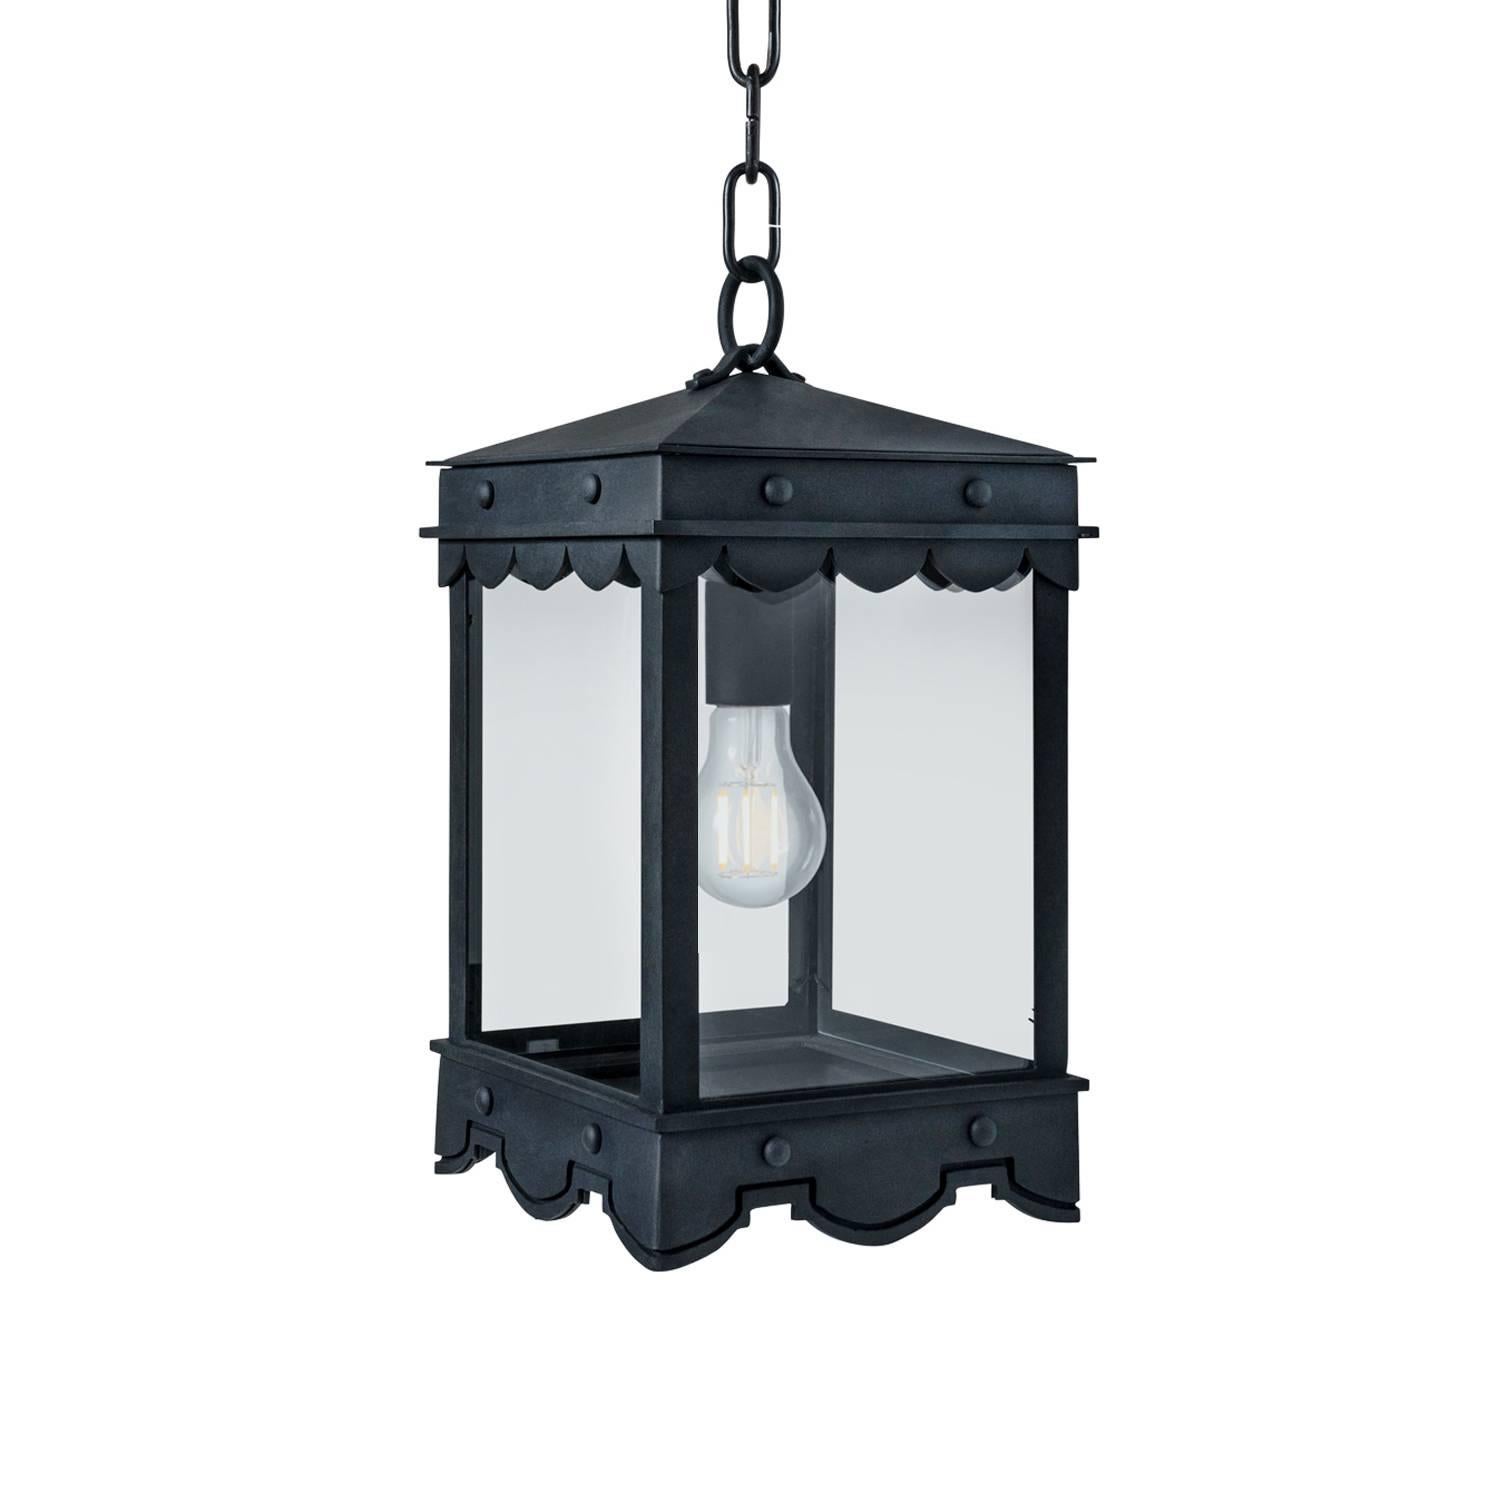 This lantern has Mediterranean style precedence with historic profiles and contemporized geometric lines. A striking fixture during the day but even more so at night when the patterned hem casts intricate shadows.

Canopy dimensions: 5